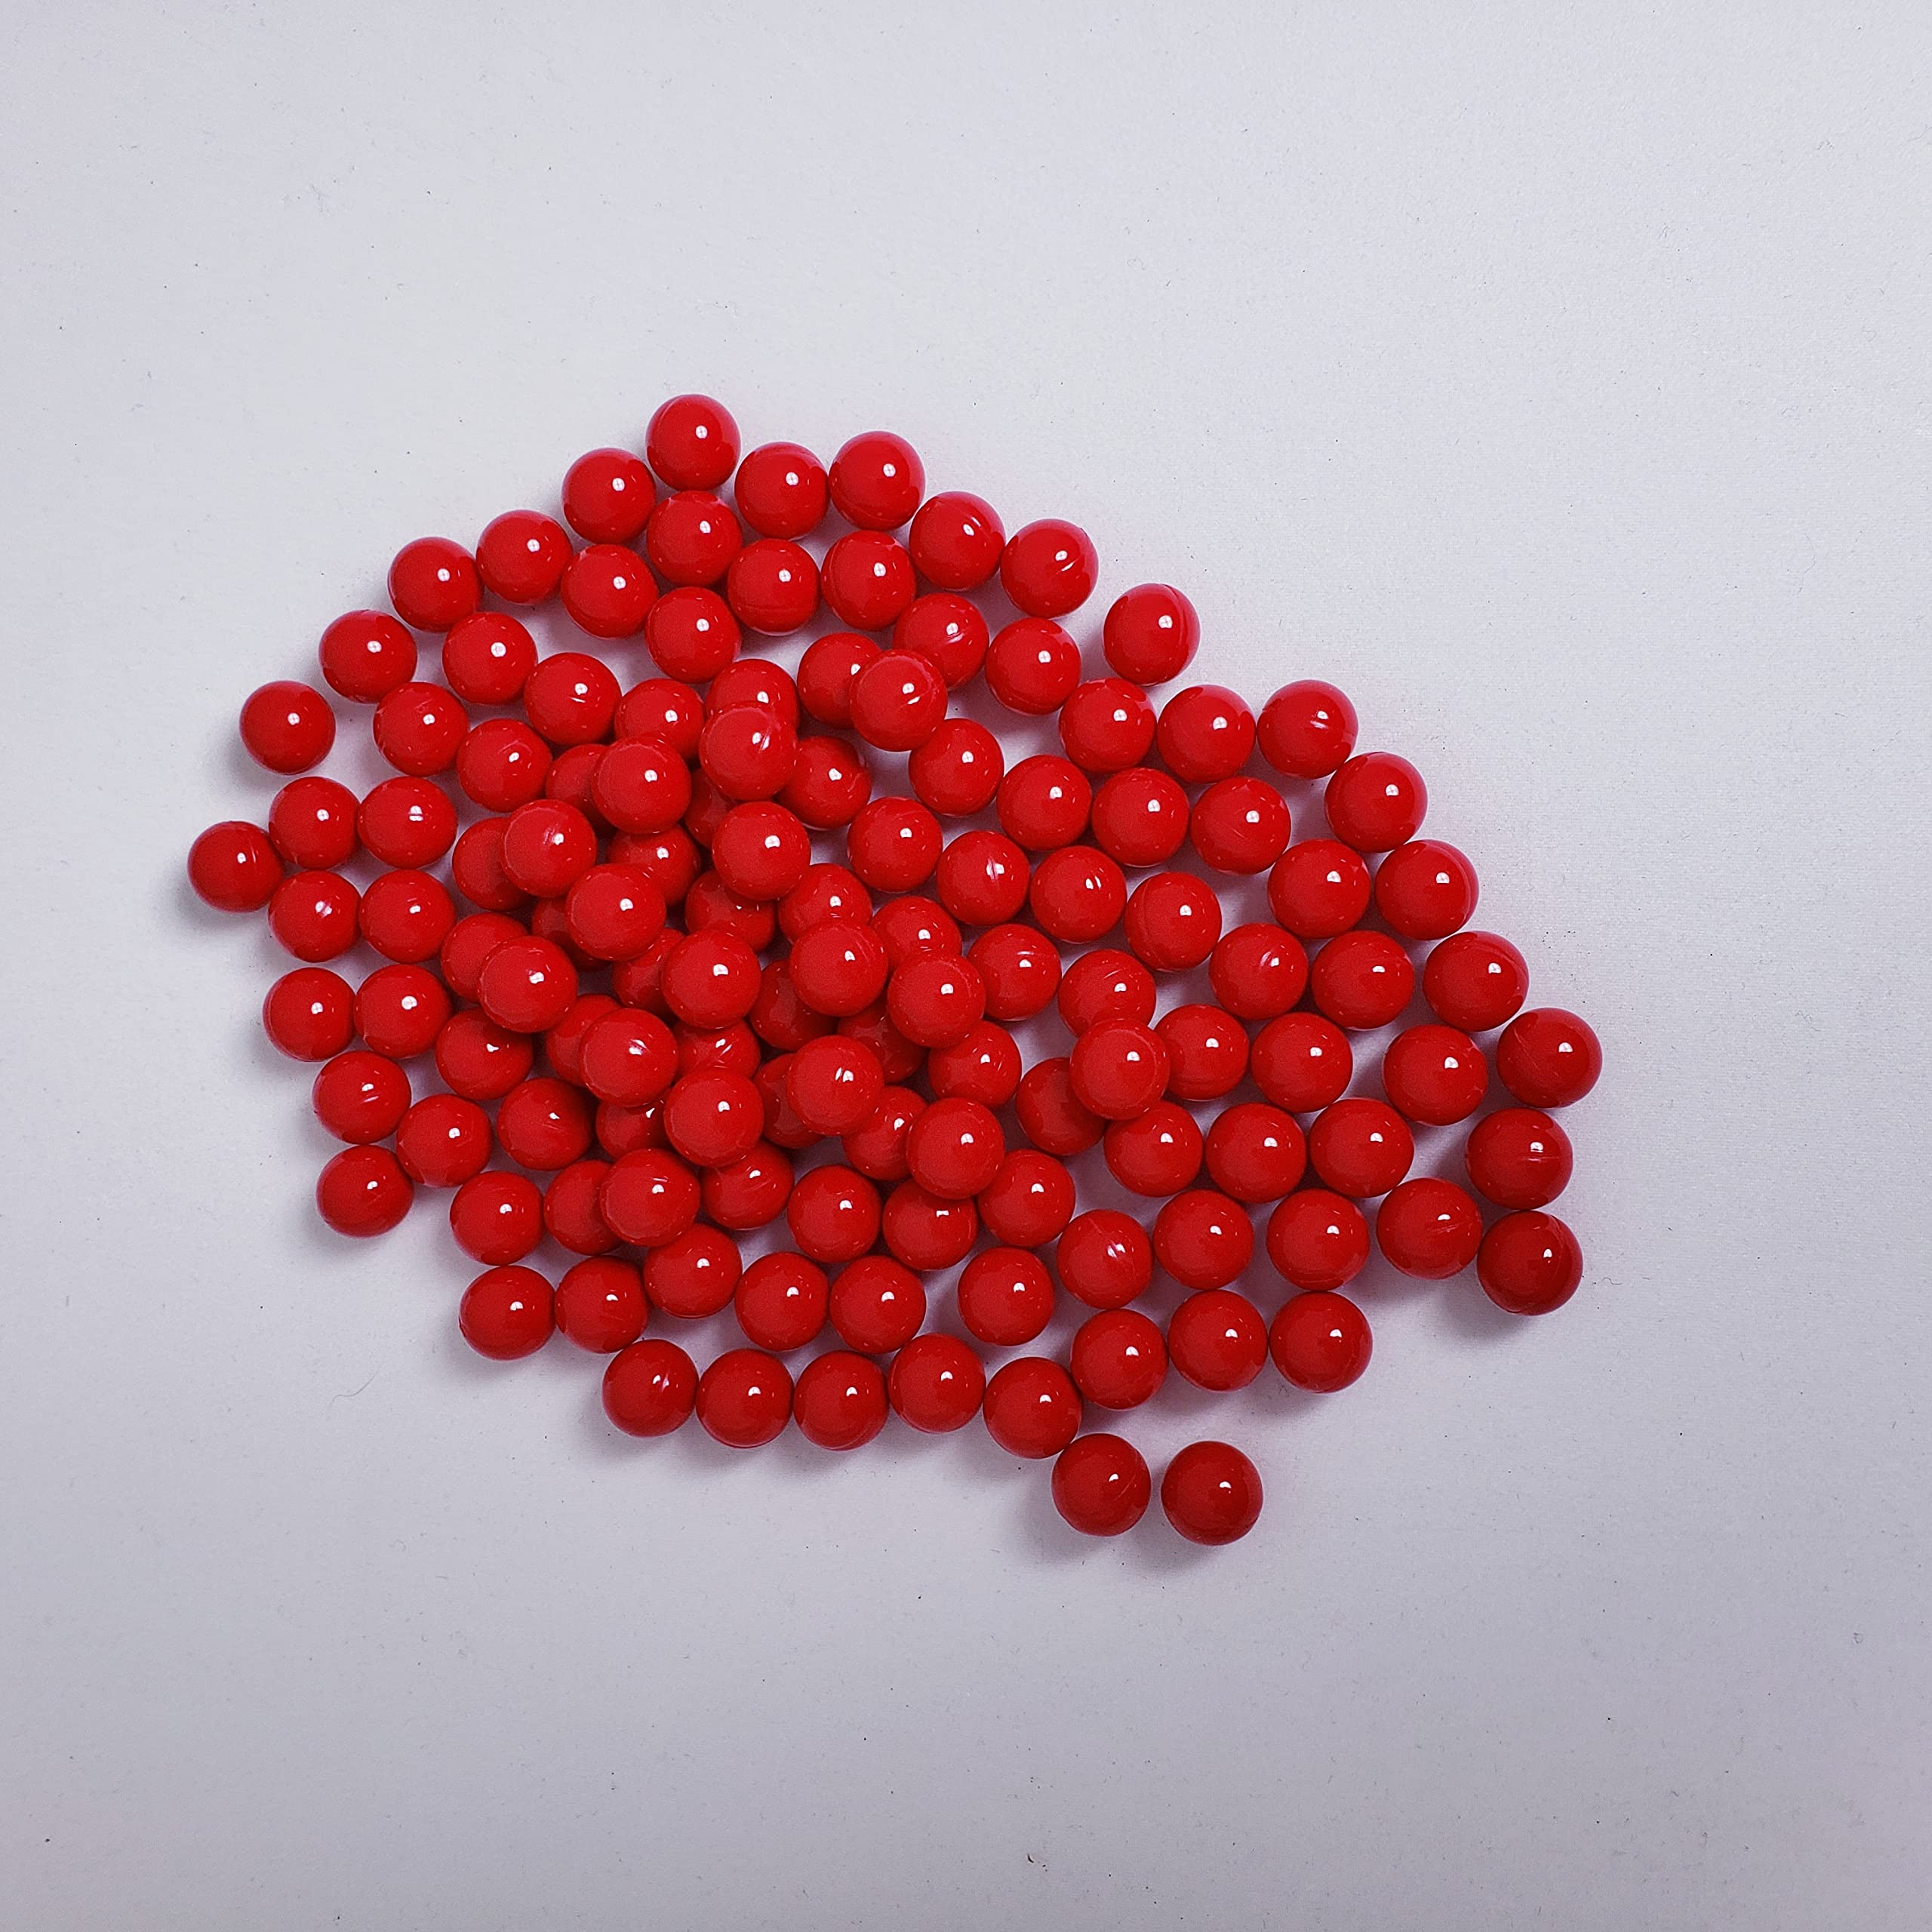 .43 Cal Red Paintballs for Umarex T4E Paintball Pistols Blood Red Fill-250 Count